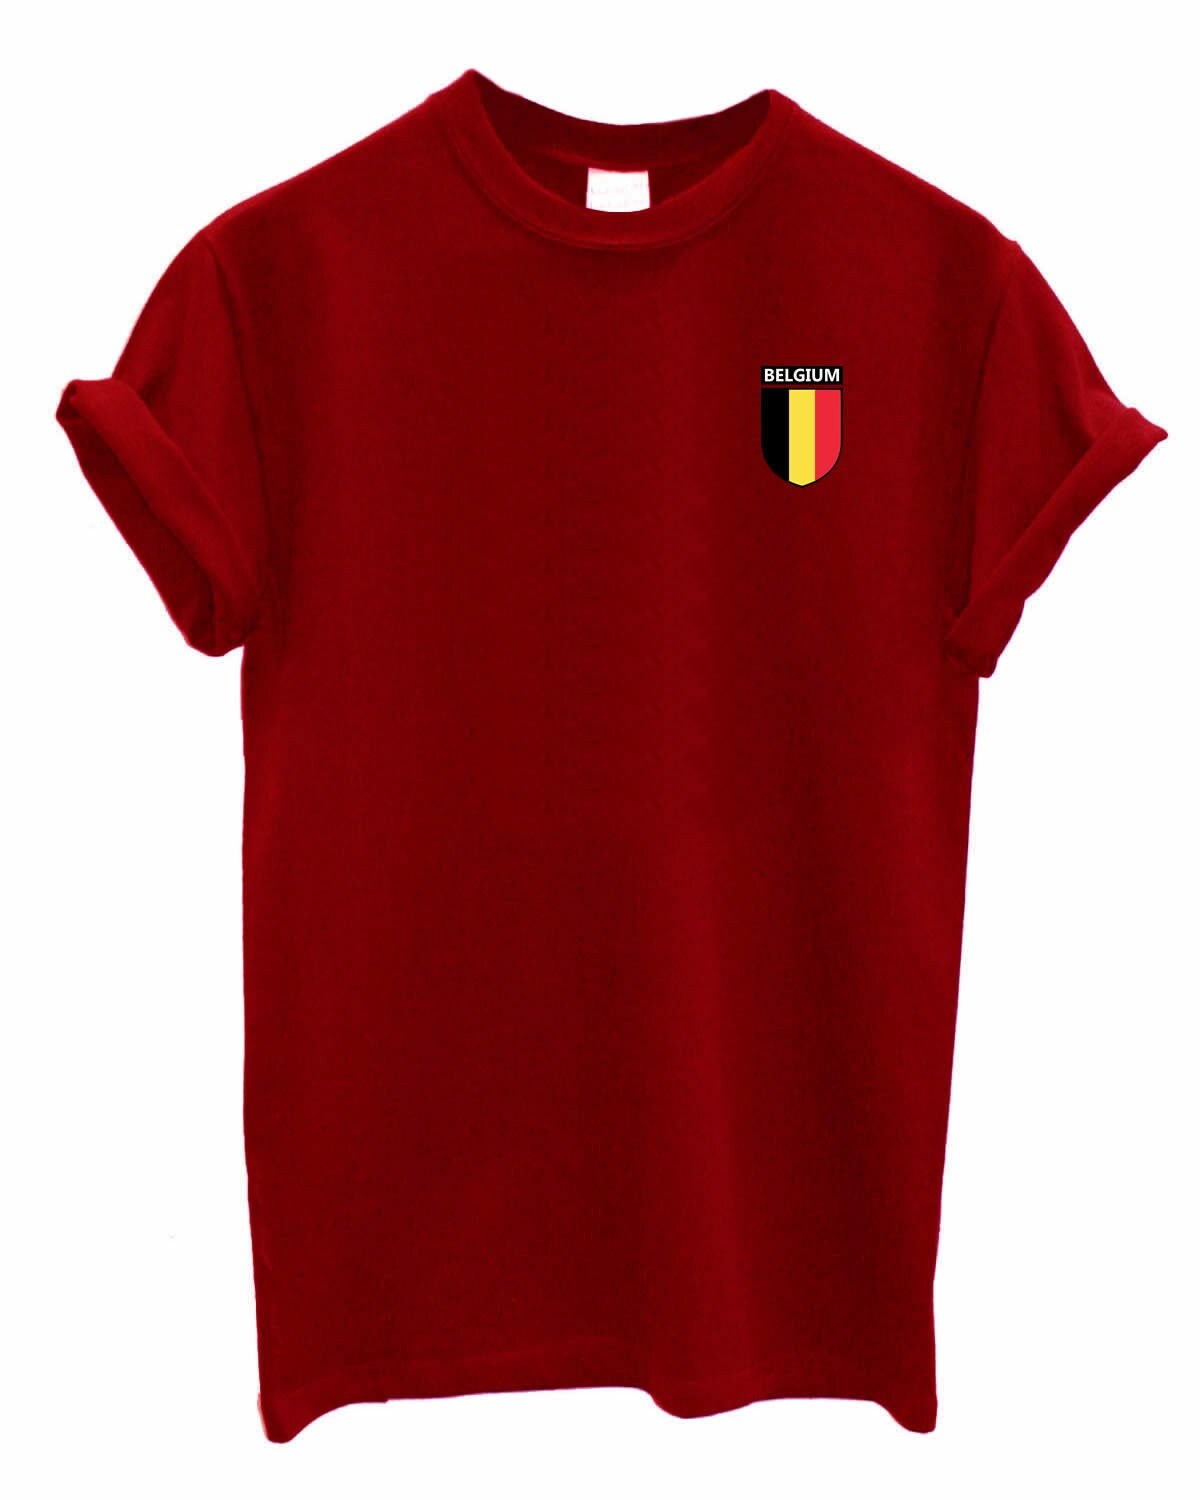 Belgium Team Crest Unisex Crew neck Tshirt Support your Country football rugby cricket